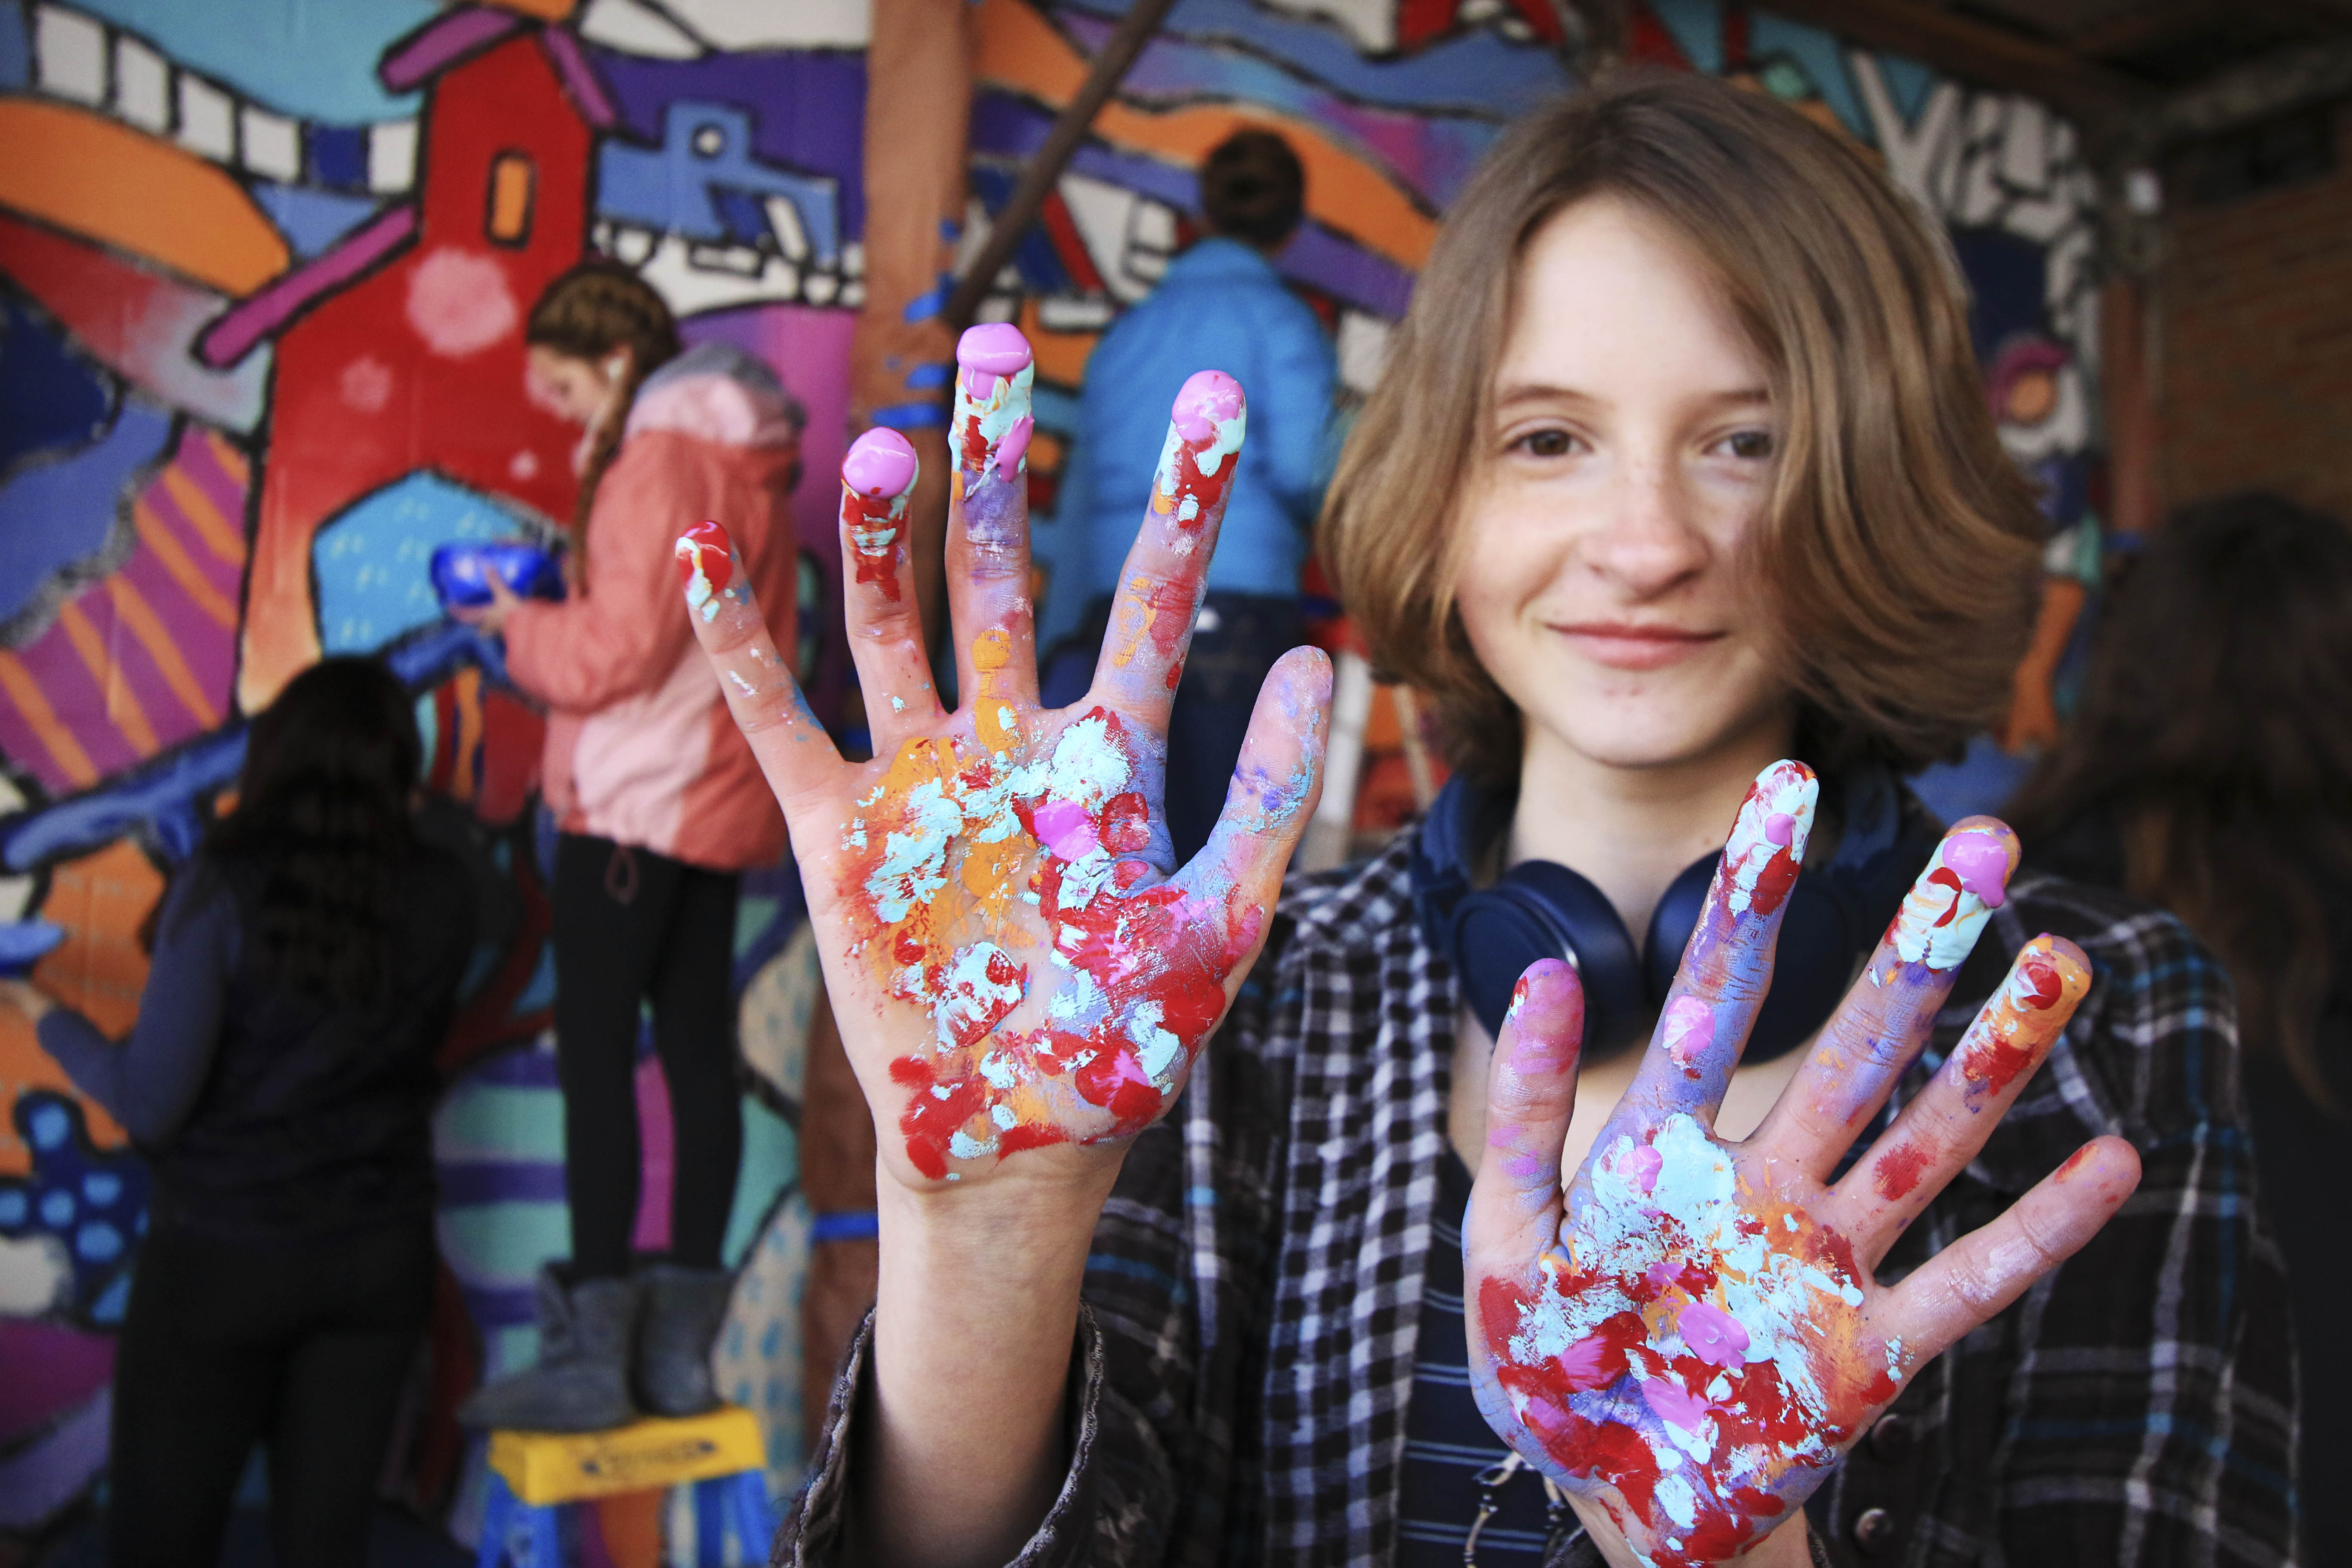 Sophia Cajune shows her messy hands as she and her Park High School classmates work on a mural project, guided by Tenesse artist Andee Rudloff, in an alley behind Out of the Blue Antiques in downtown Livingston on Tuesday afternoon.